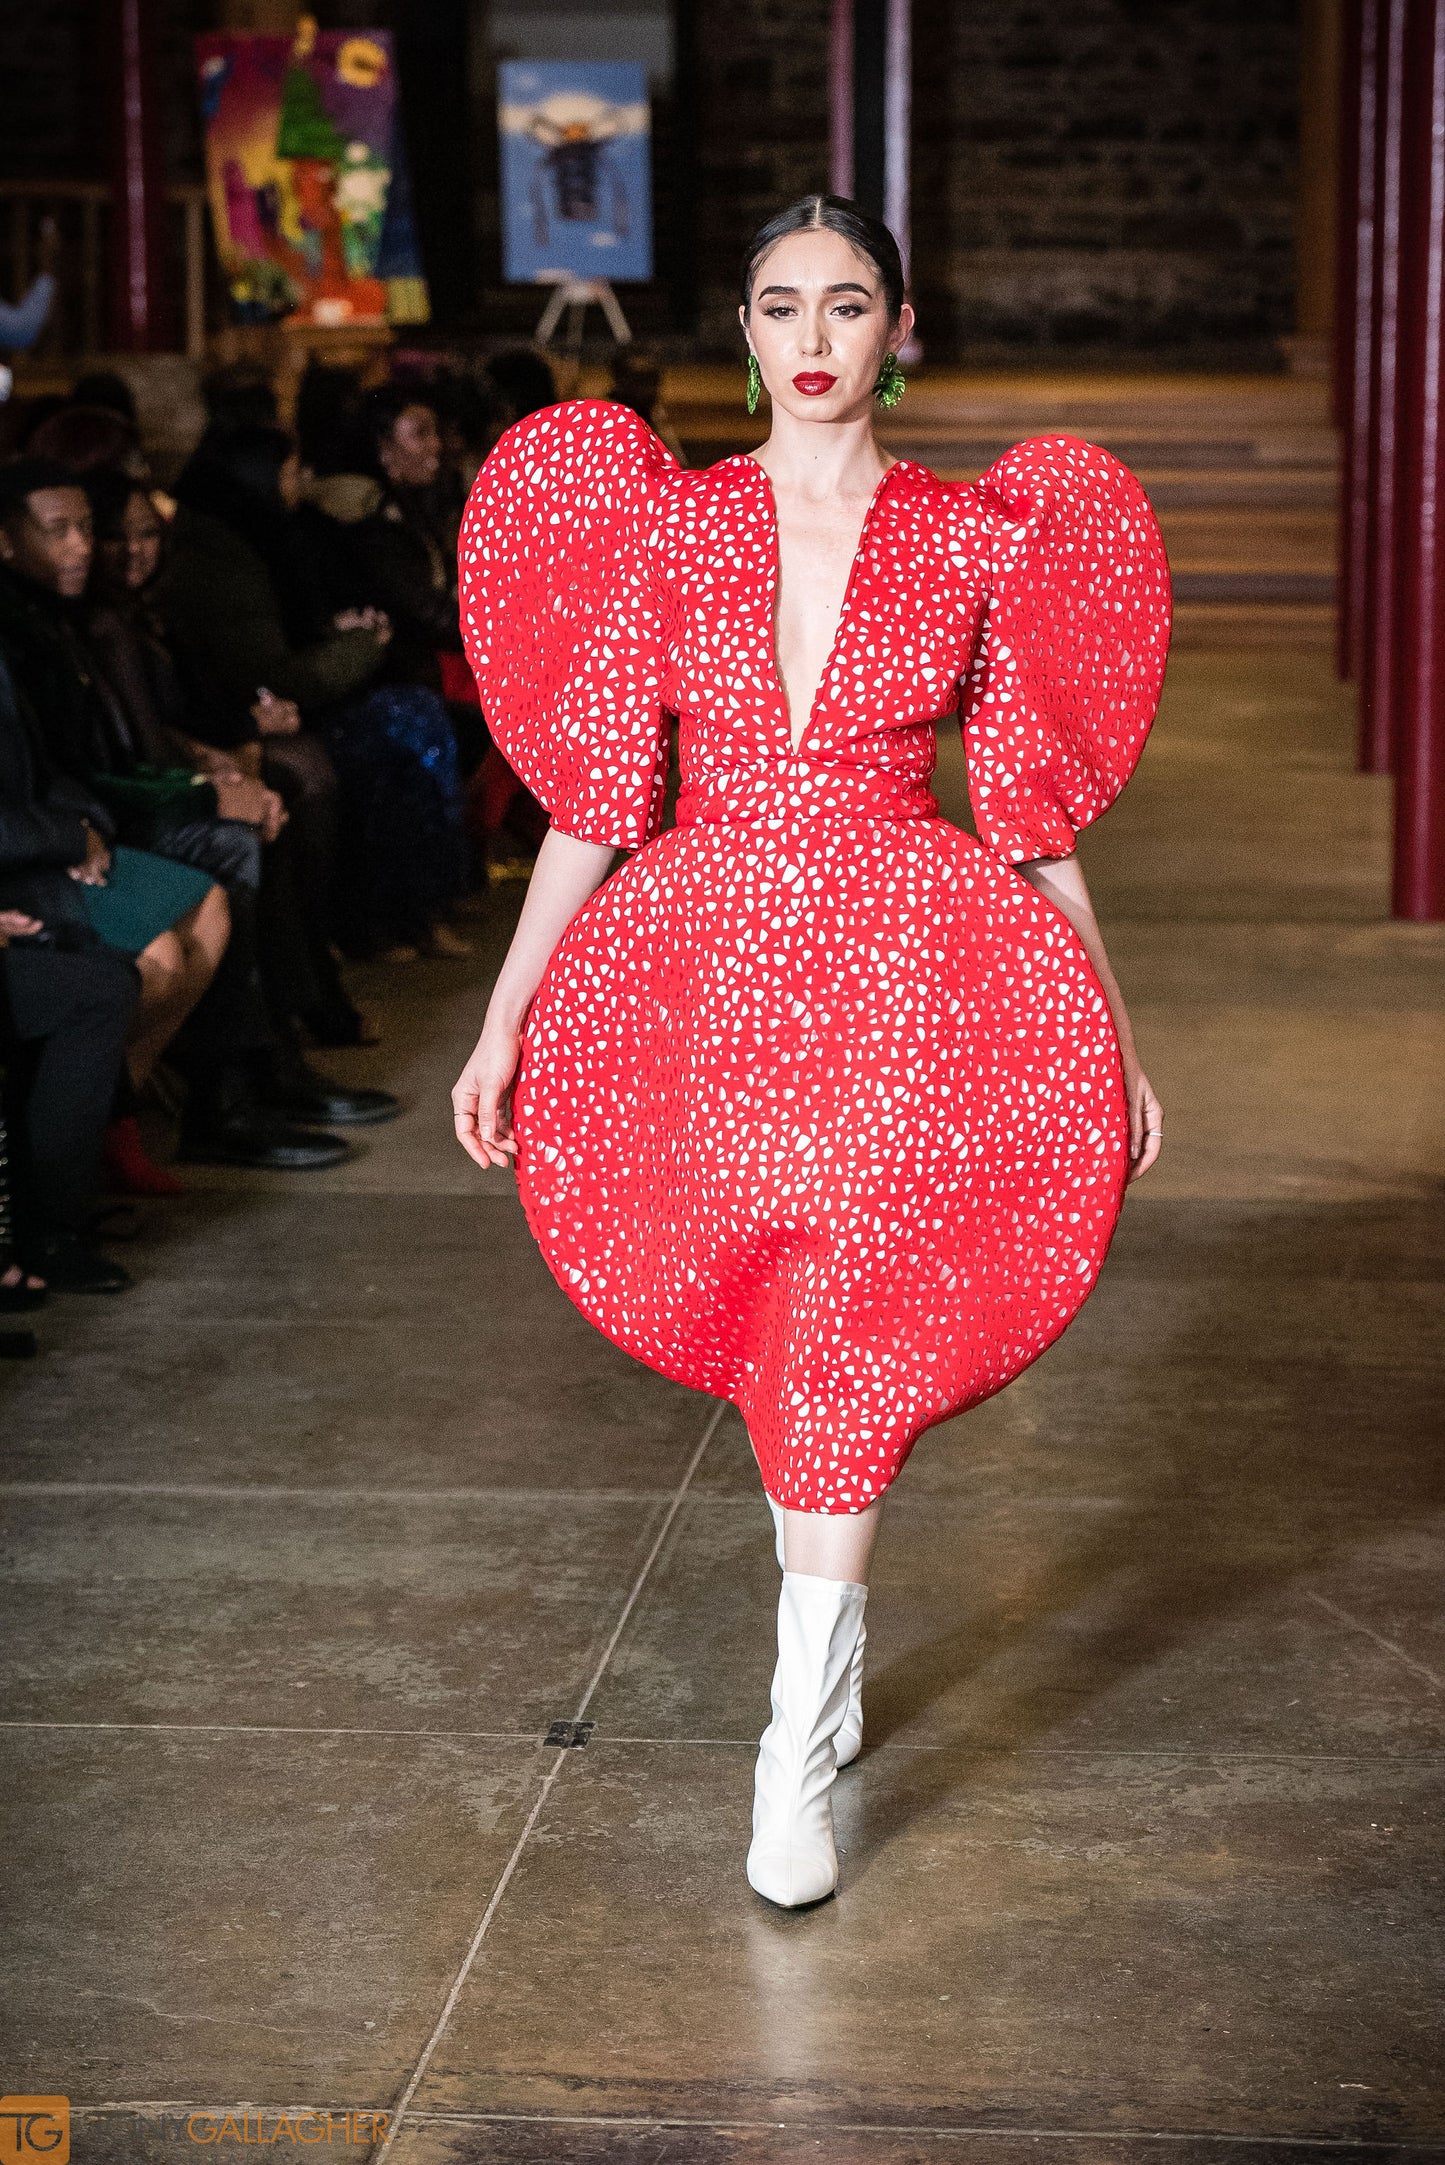 Dali Collection: Sweetheart Red Laser Cut Bomb Dress